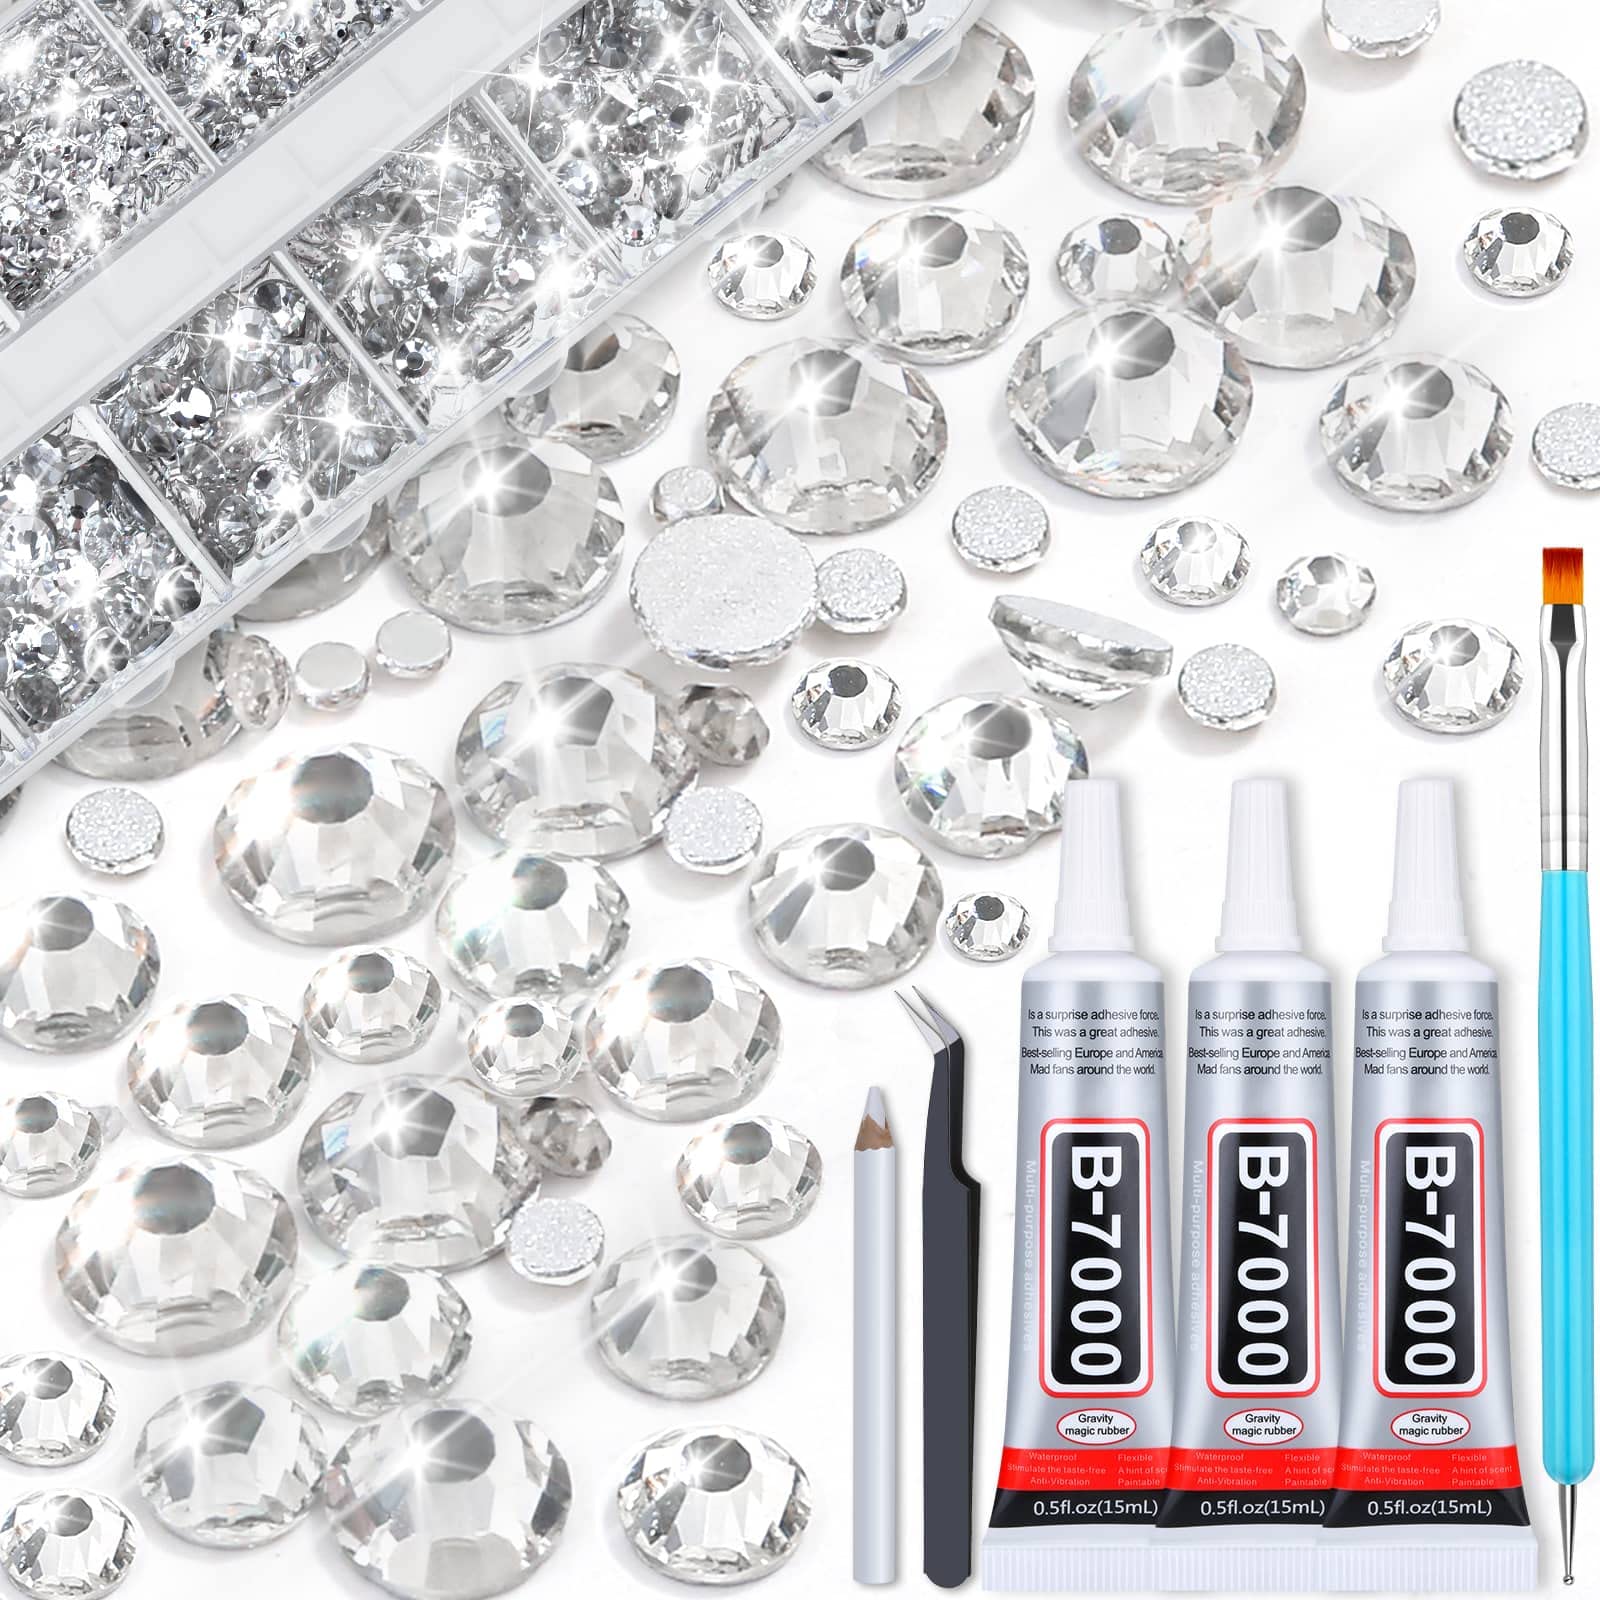 B7000 Rhinestones Clear Glue with Rhinestones for Crafts, 3600Pcs Face Gems Clear  Rhinestones Kit 6 Sizes (1.5-6 mm) with Fabric Glue for Clothes Shoes Nail  Art Face Gems Jewelry